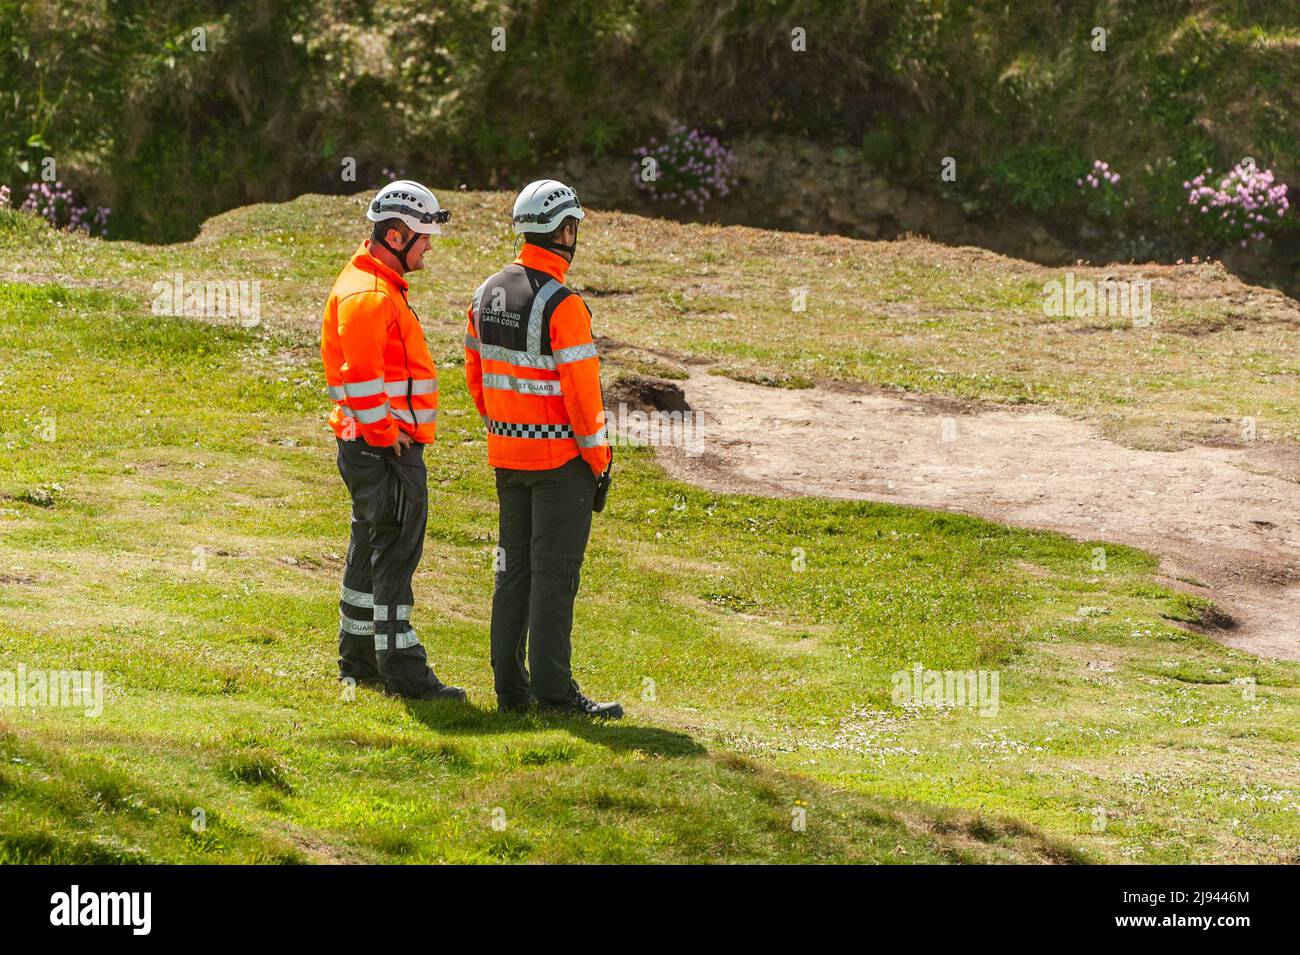 Old Head of Kinsale, West Cork, Ireland. 20th May, 2022. The search for missing 26-year-old Christopher Dunne continues today. Units of Gardai, Civil Defence and the Irish Coastguard, as well as members of the public, were out searching for Christopher from 7am this morning. Credit: AG News/Alamy Live News Stock Photo